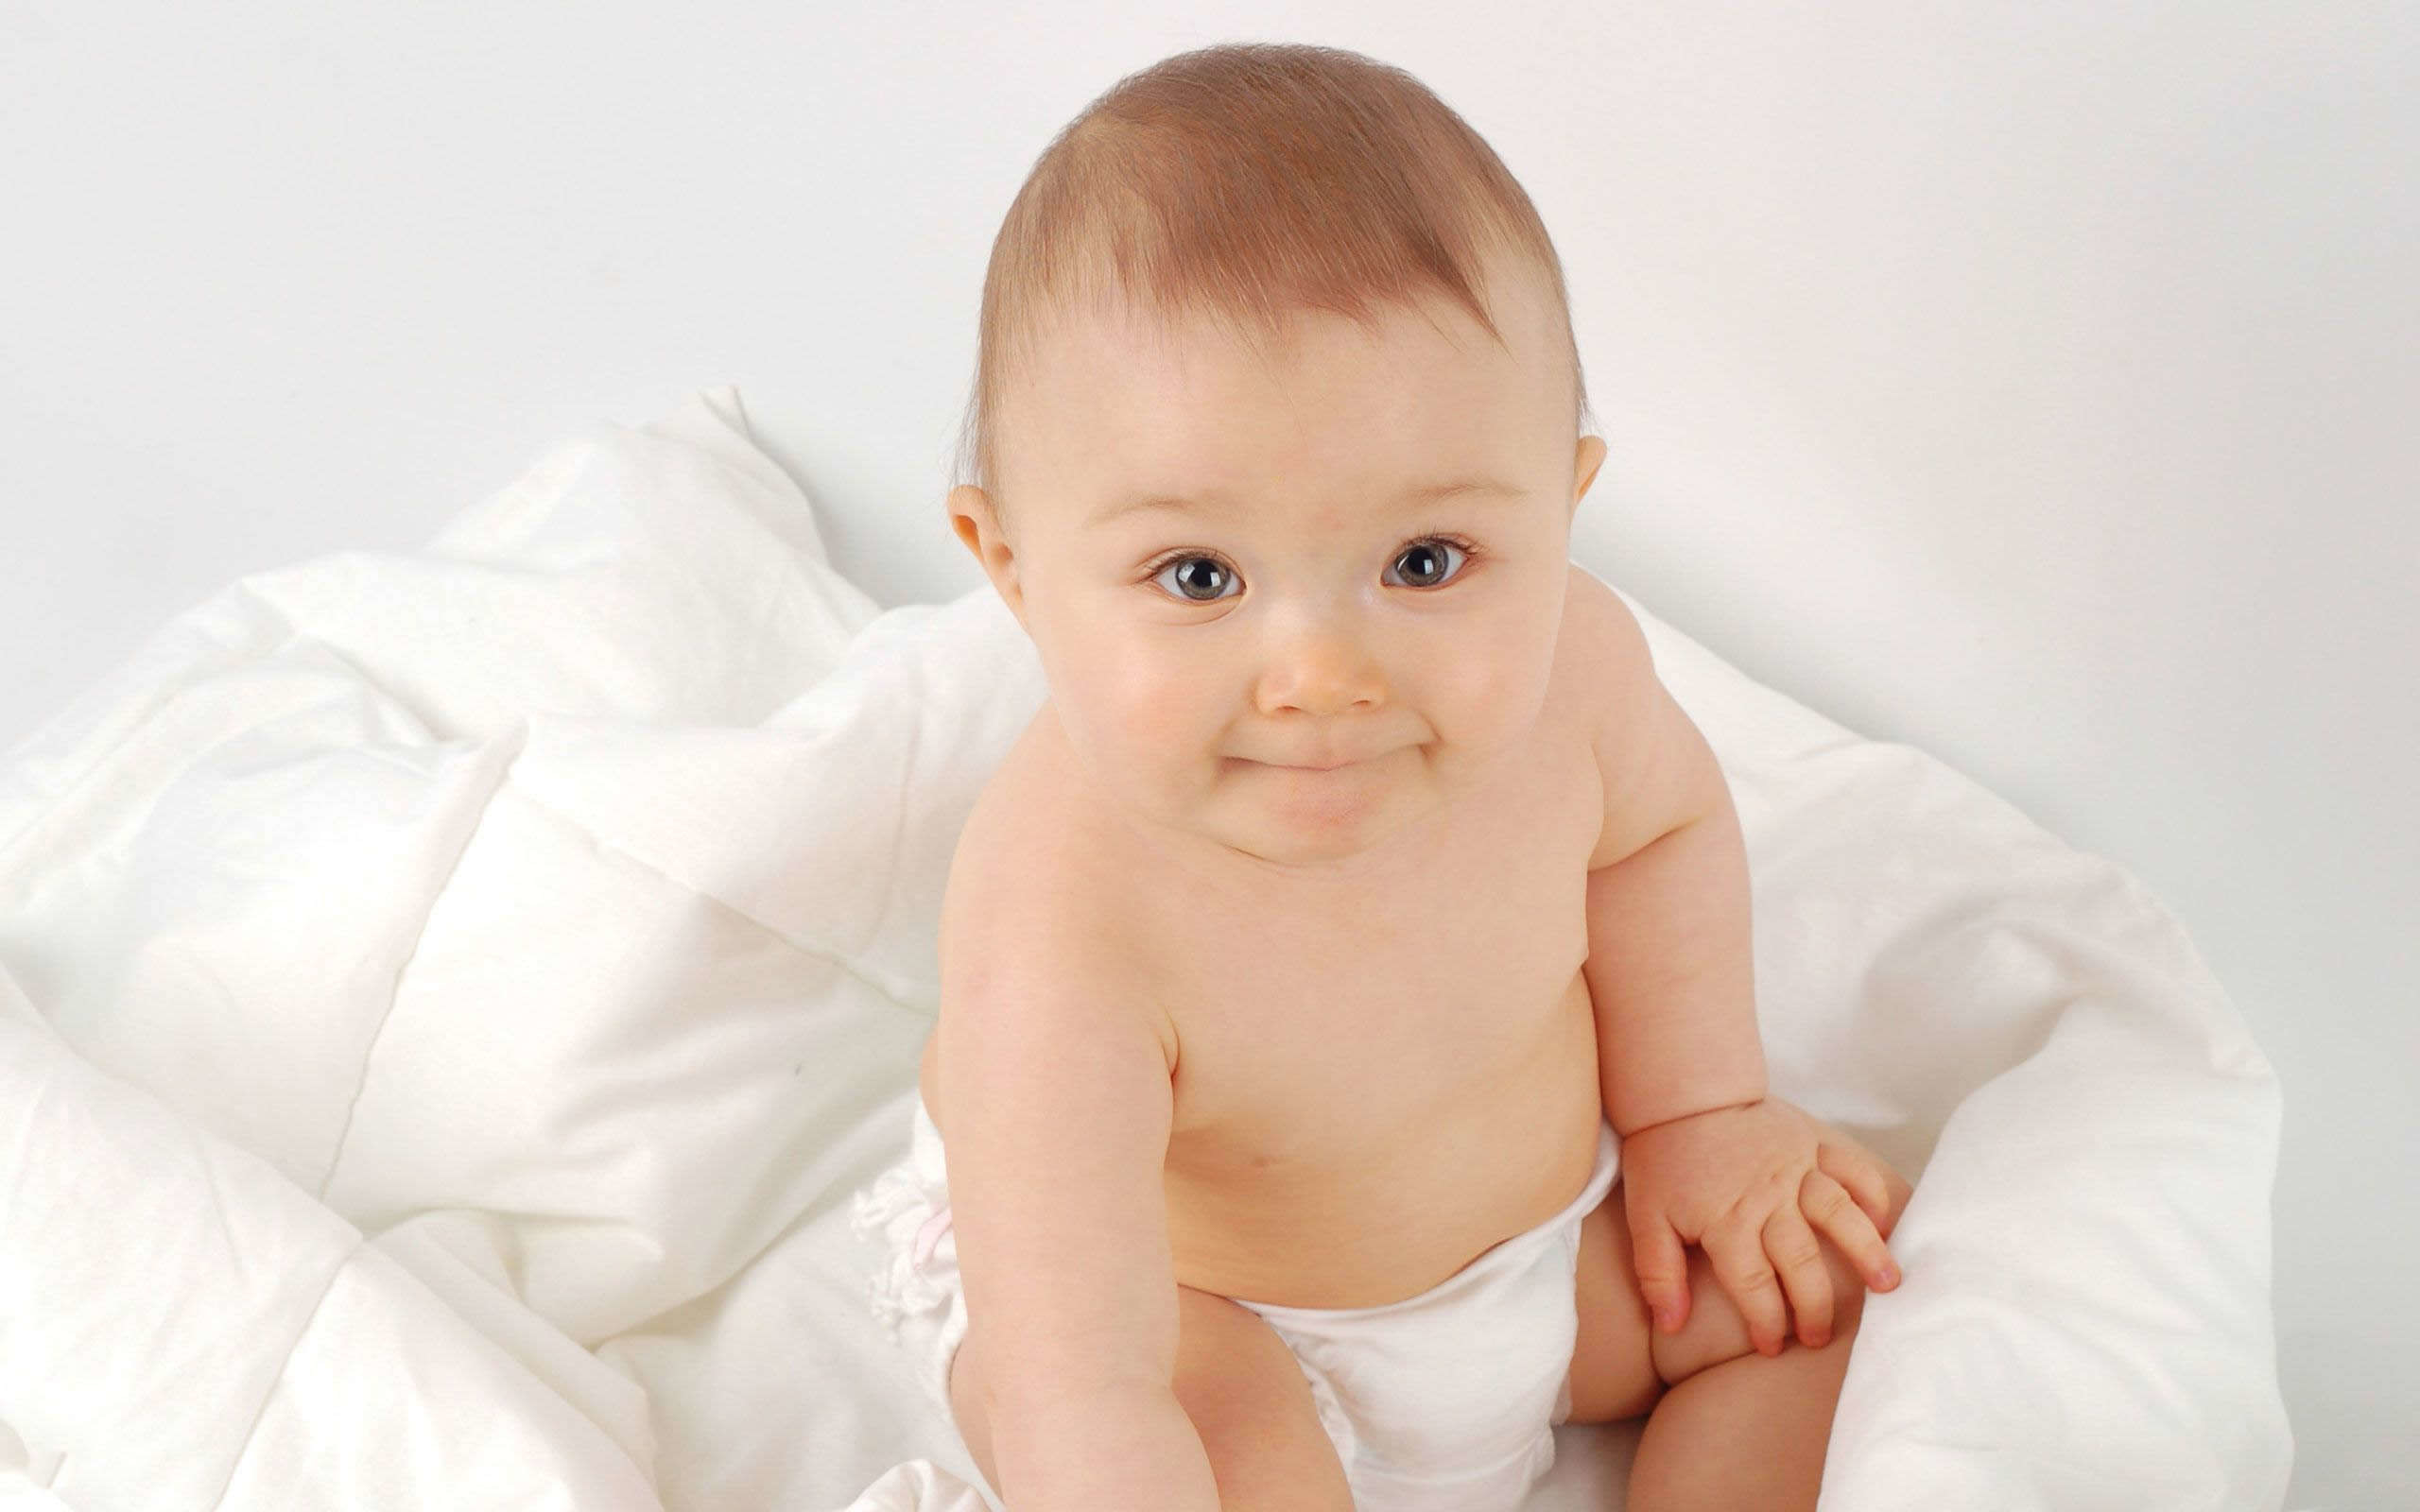 2560x1600 42 units of Cute Babies Images Free Download